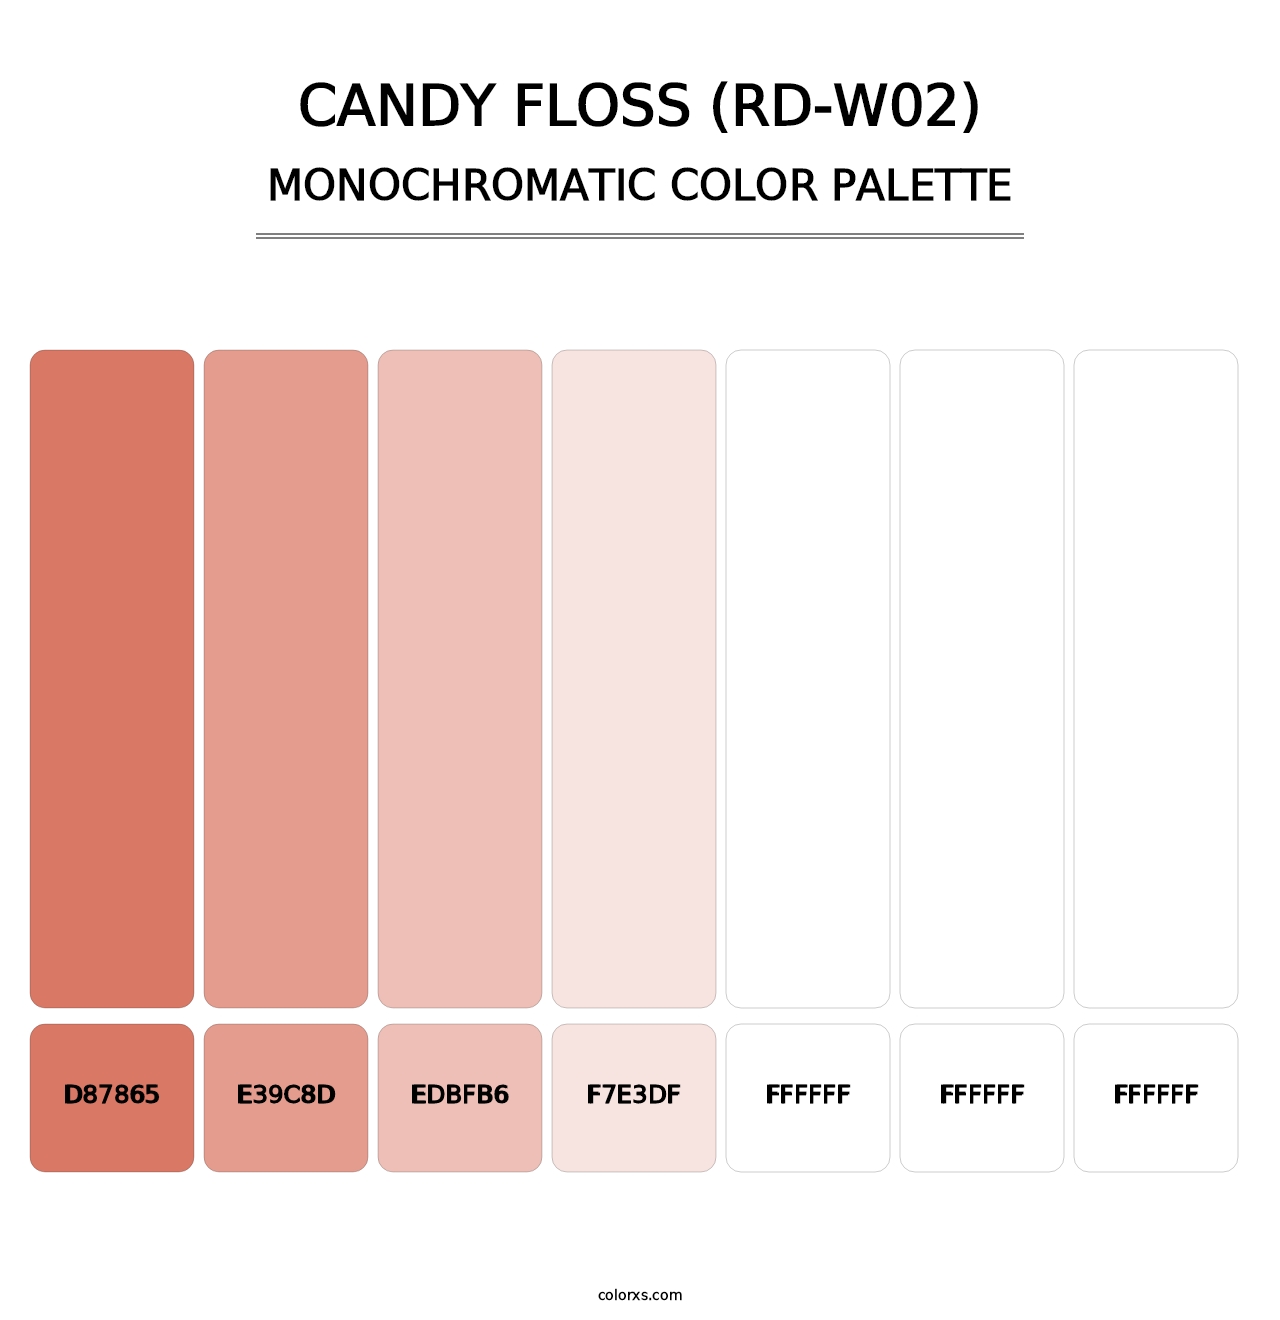 Candy Floss (RD-W02) - Monochromatic Color Palette